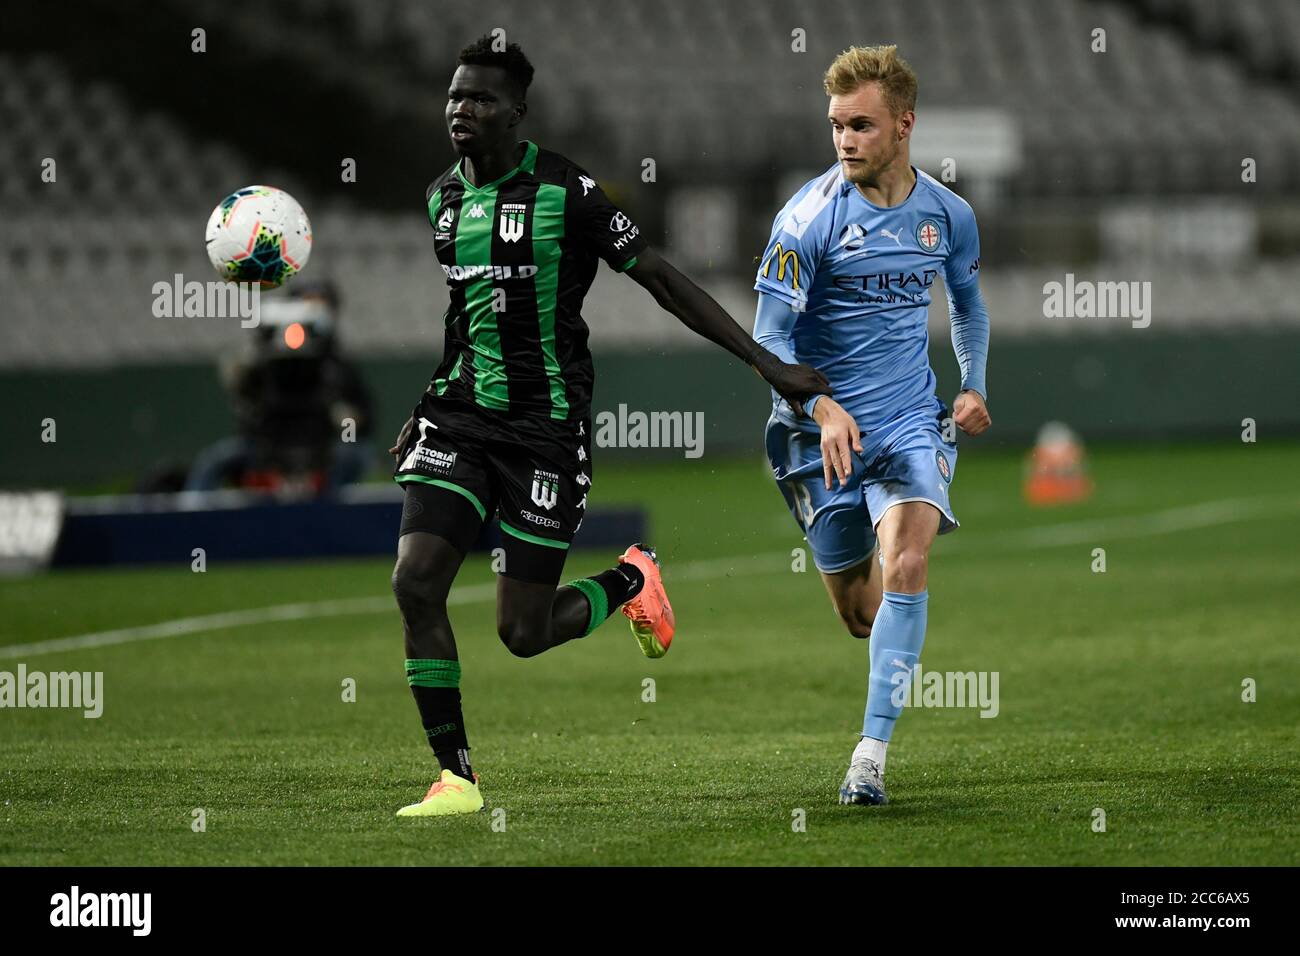 19th August 2020; Jubilee Oval, Sydney, New South Wales, Australia; A League Football, Western United FC versus Melbourne City FC; Nathaniel Atkinson of Melbourne City holds off the challenge from Kuach Yuel of Western United Stock Photo